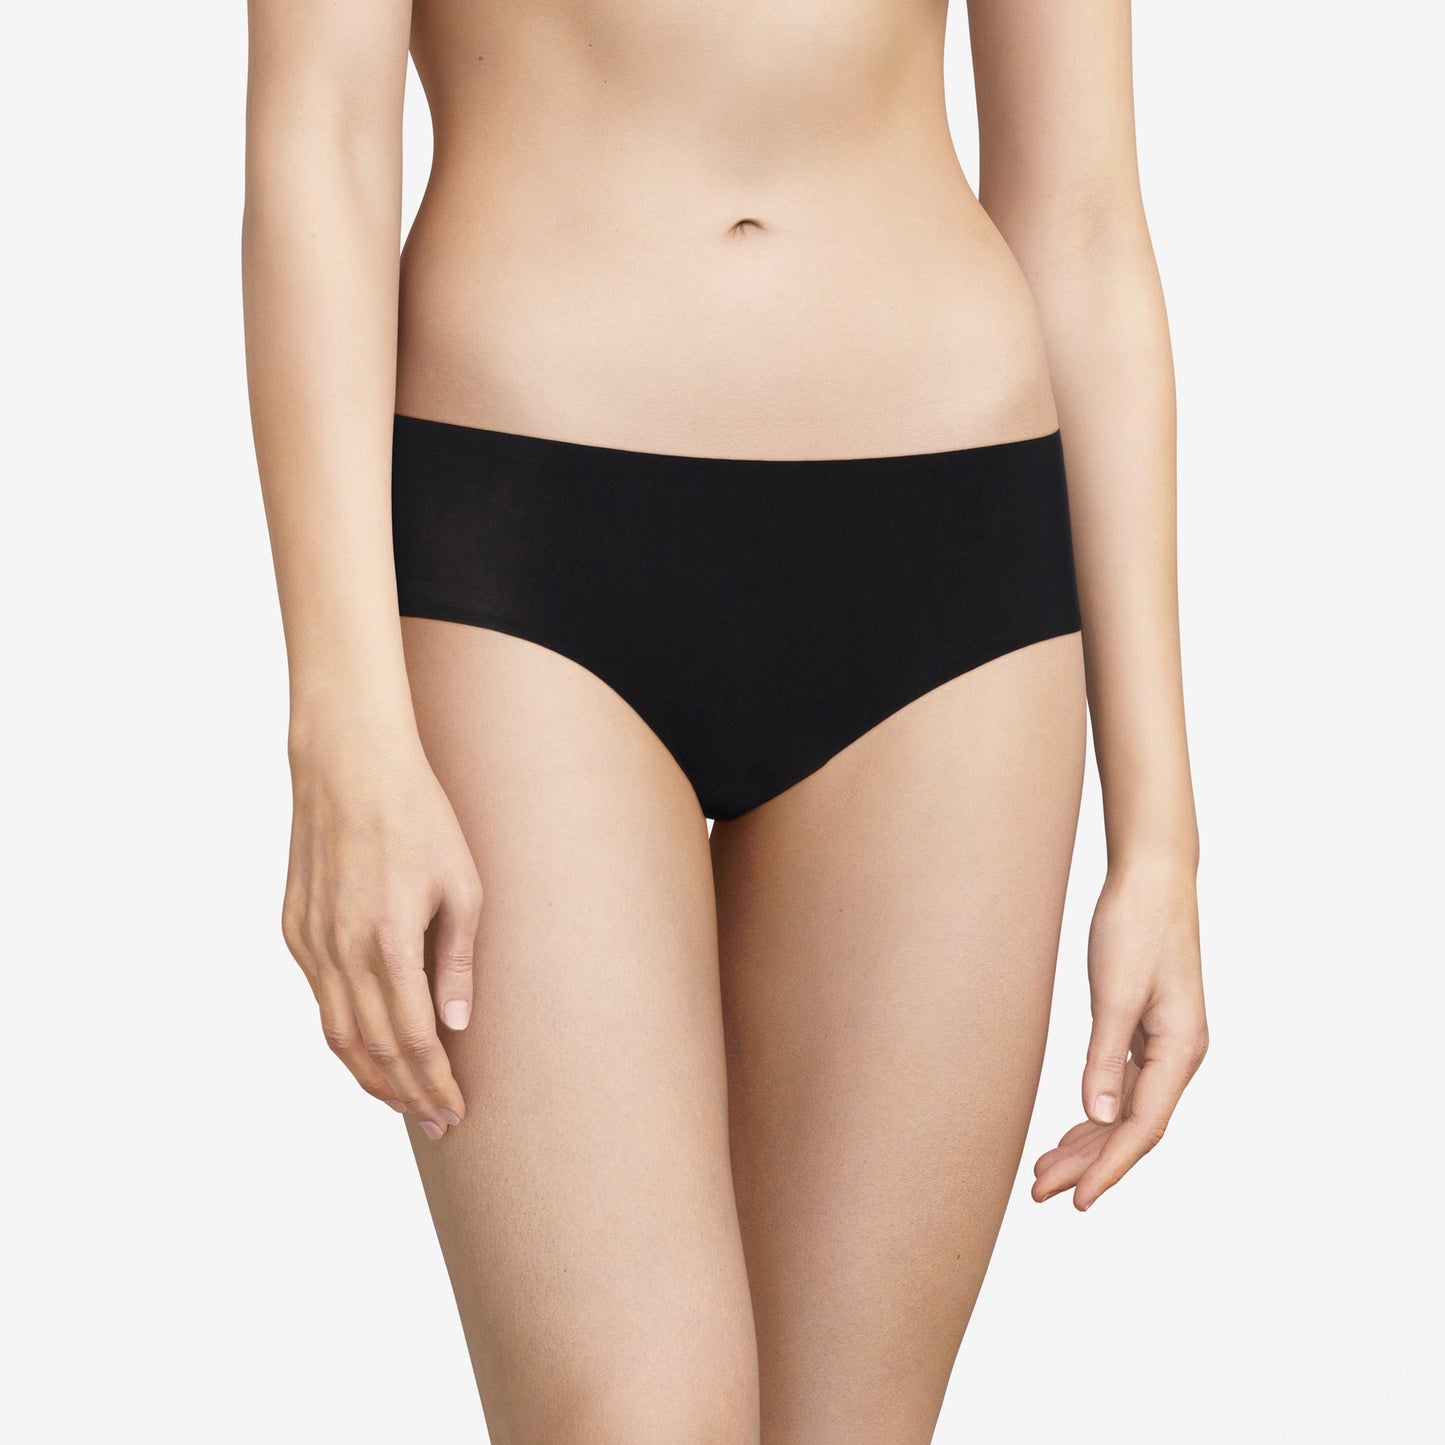 Pretty Things Chantelle Soft Stretch Black Shorty - Underwear Specialists 